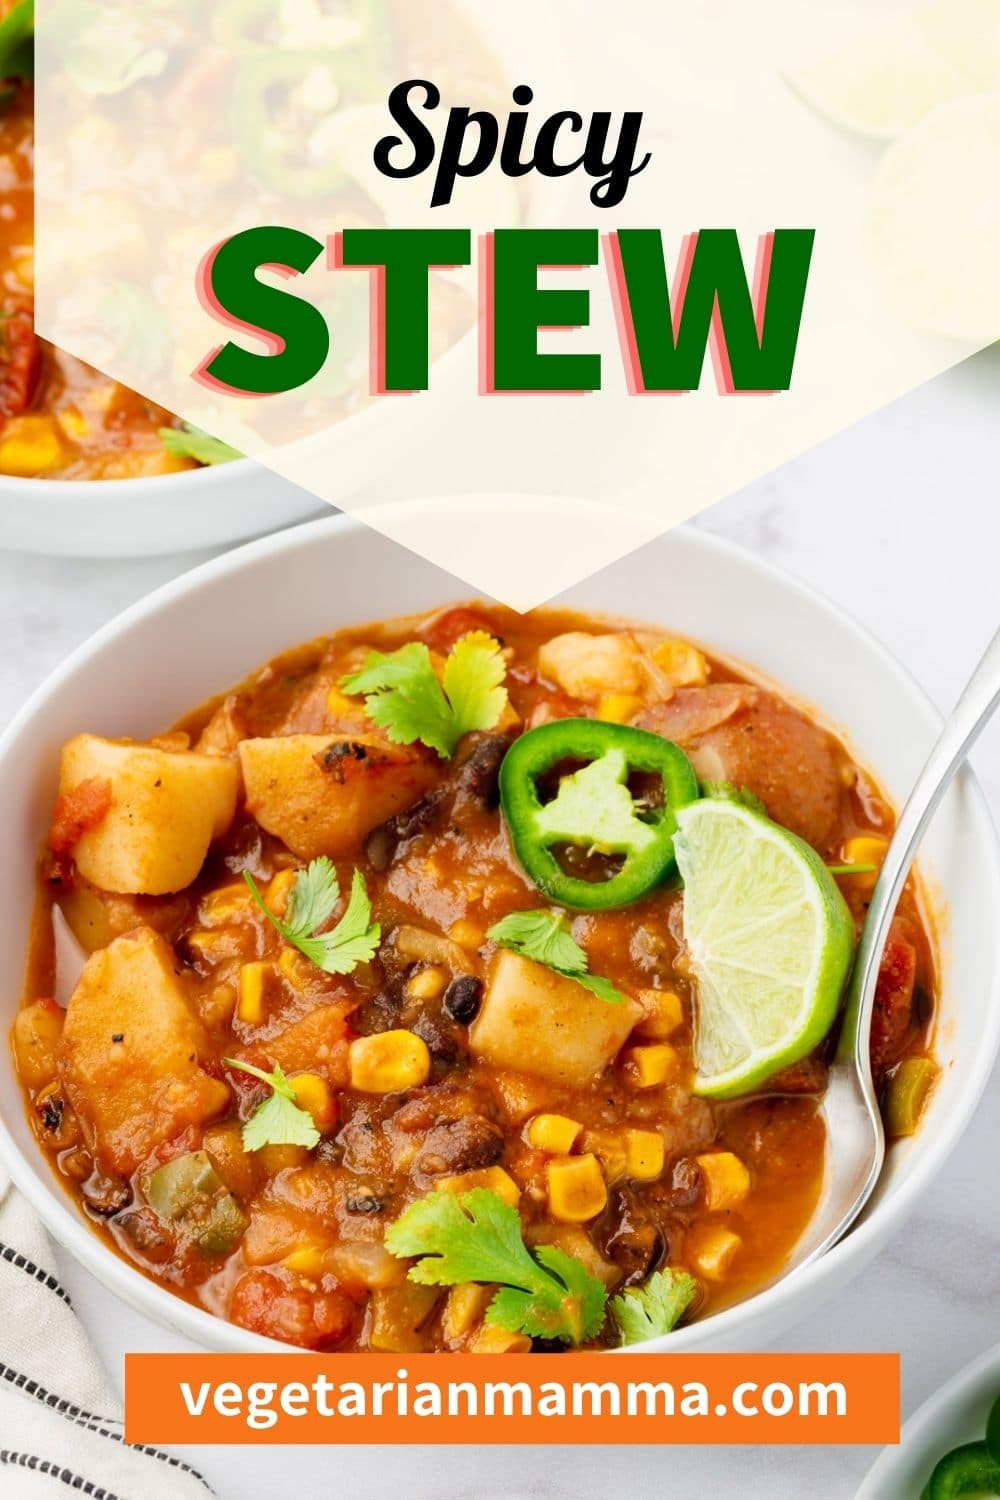 Spicy Stew will warm you up with flavor, spice and hearty ingredients. This spicy stew is simple to make and you will be begging for a second bowl! Adjust the heat of this spicy stew with adding or subtracting jalapeno peppers. | spicy stew | vegan stew | vegetarian stew | gluten free stew